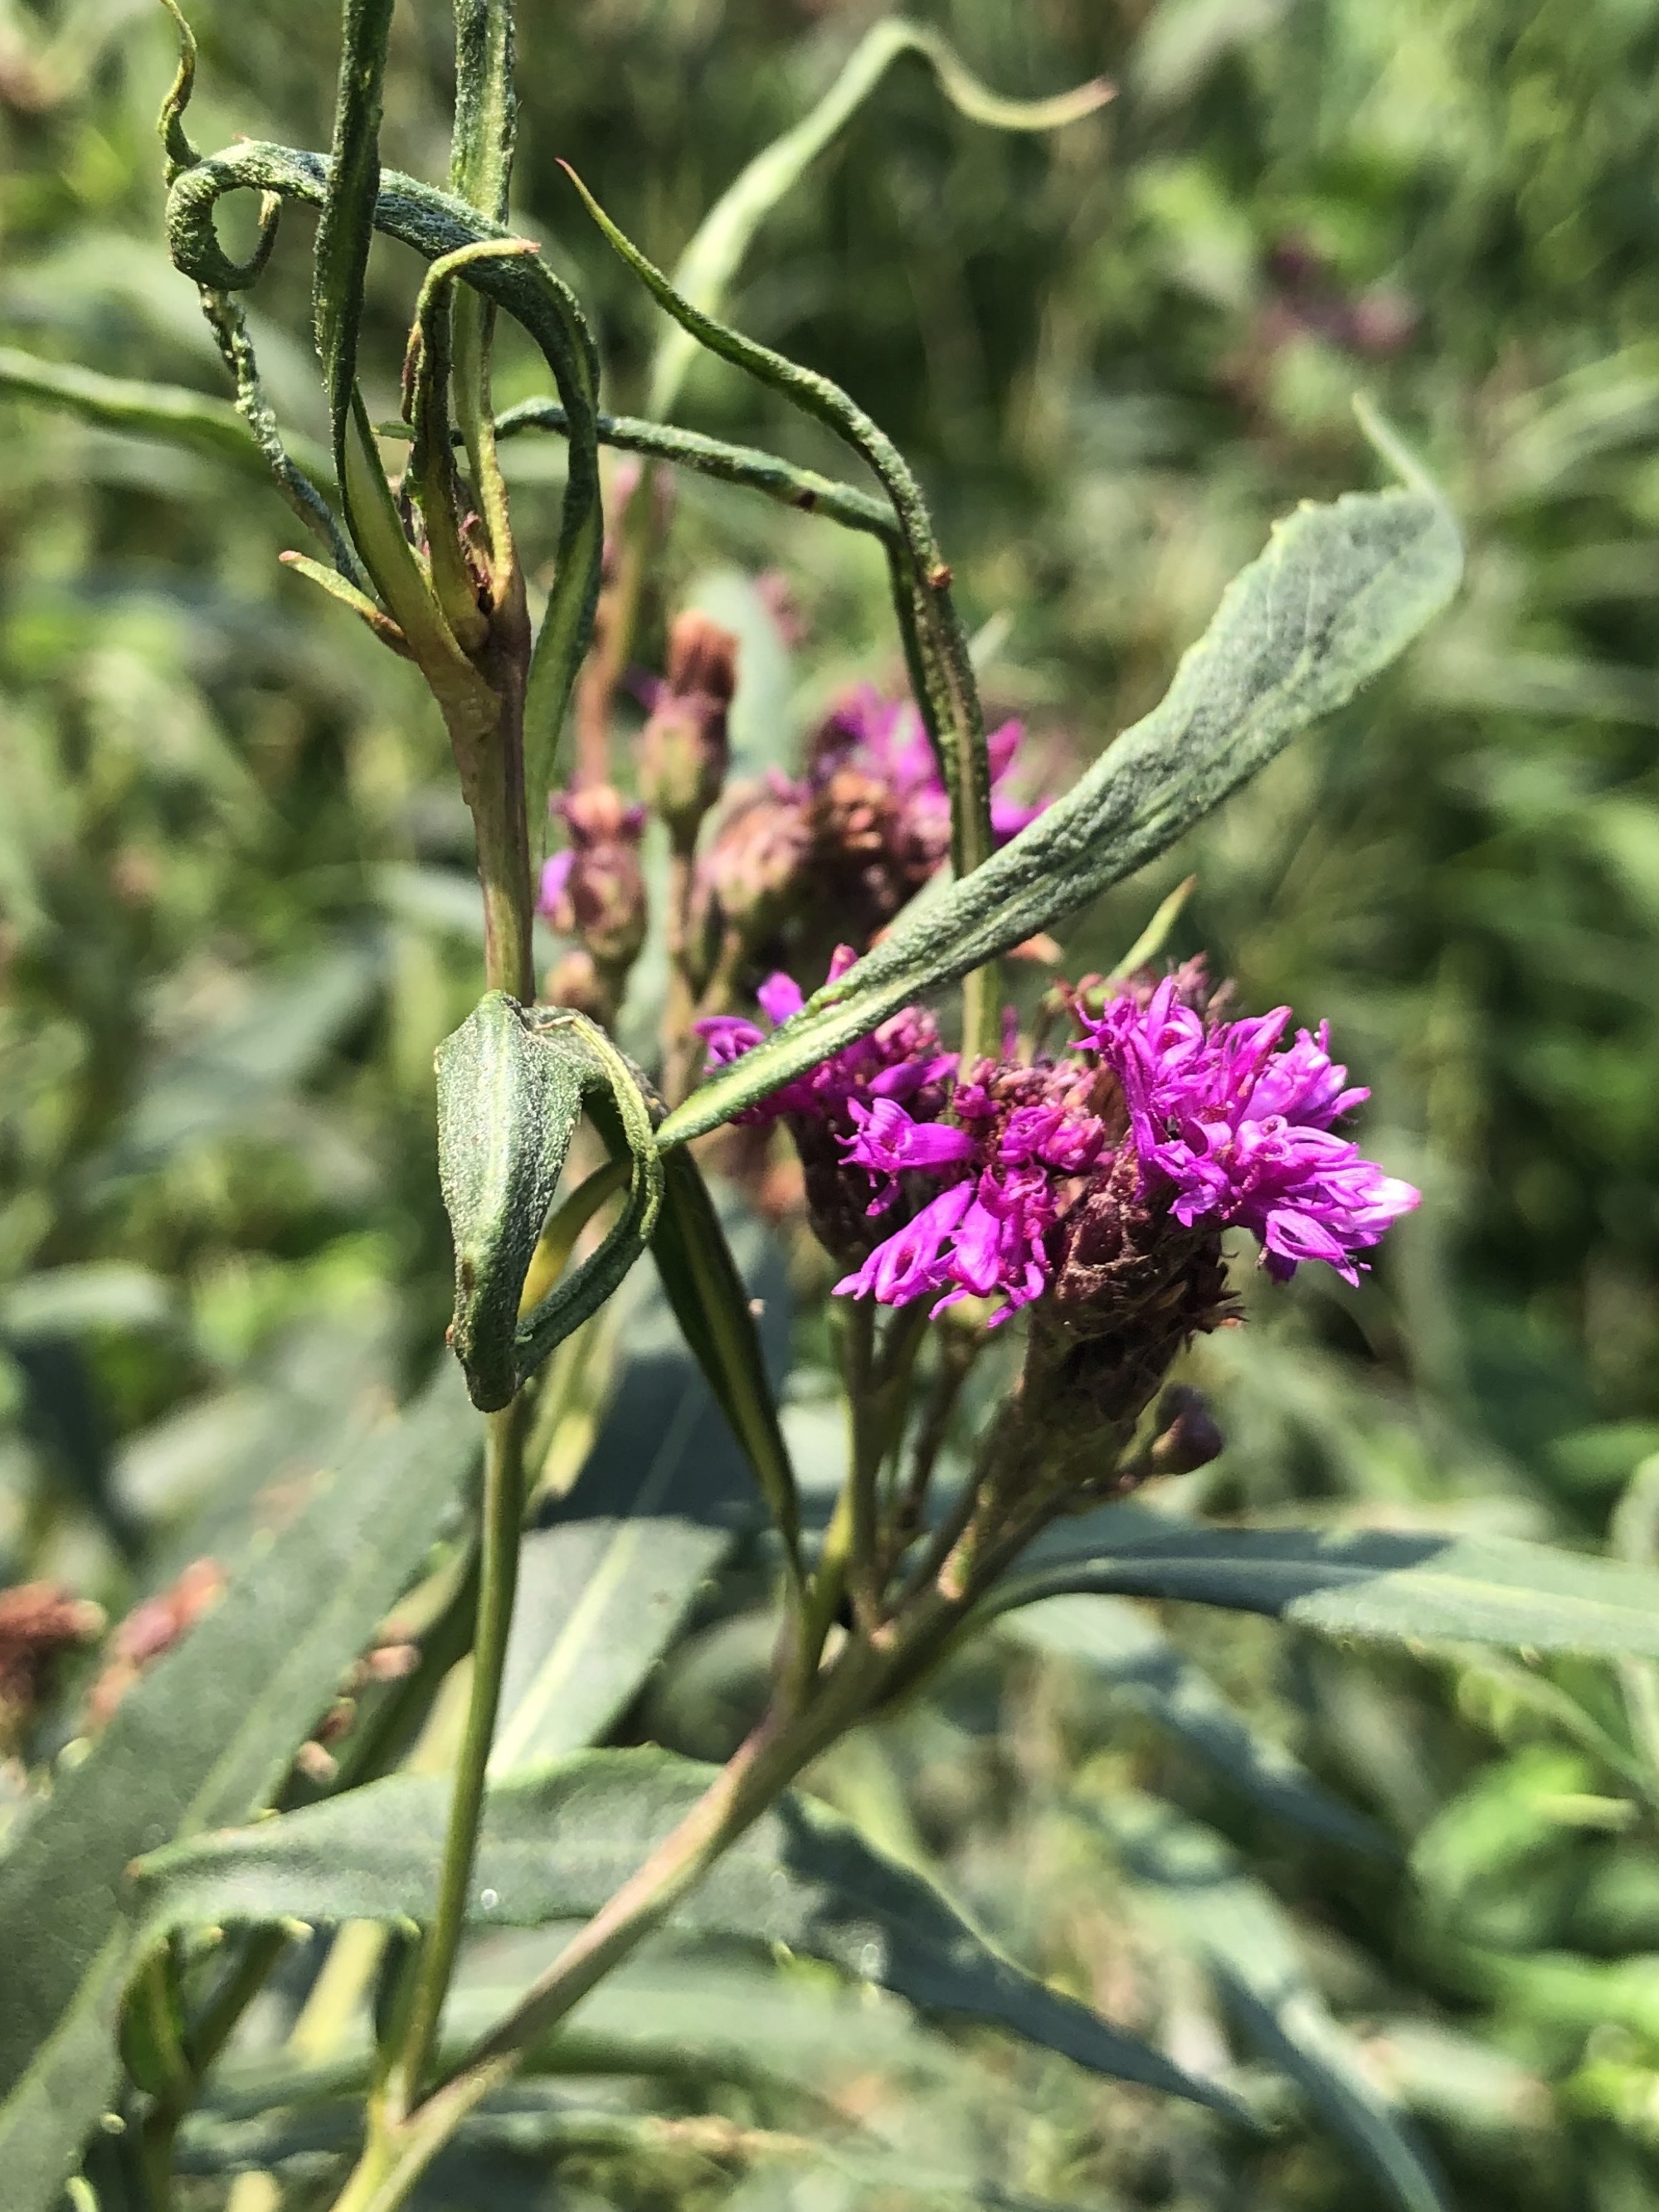 Common Ironweed along bikepath behind Gregory Street in Madison, Wisconsin on August 3, 2021.